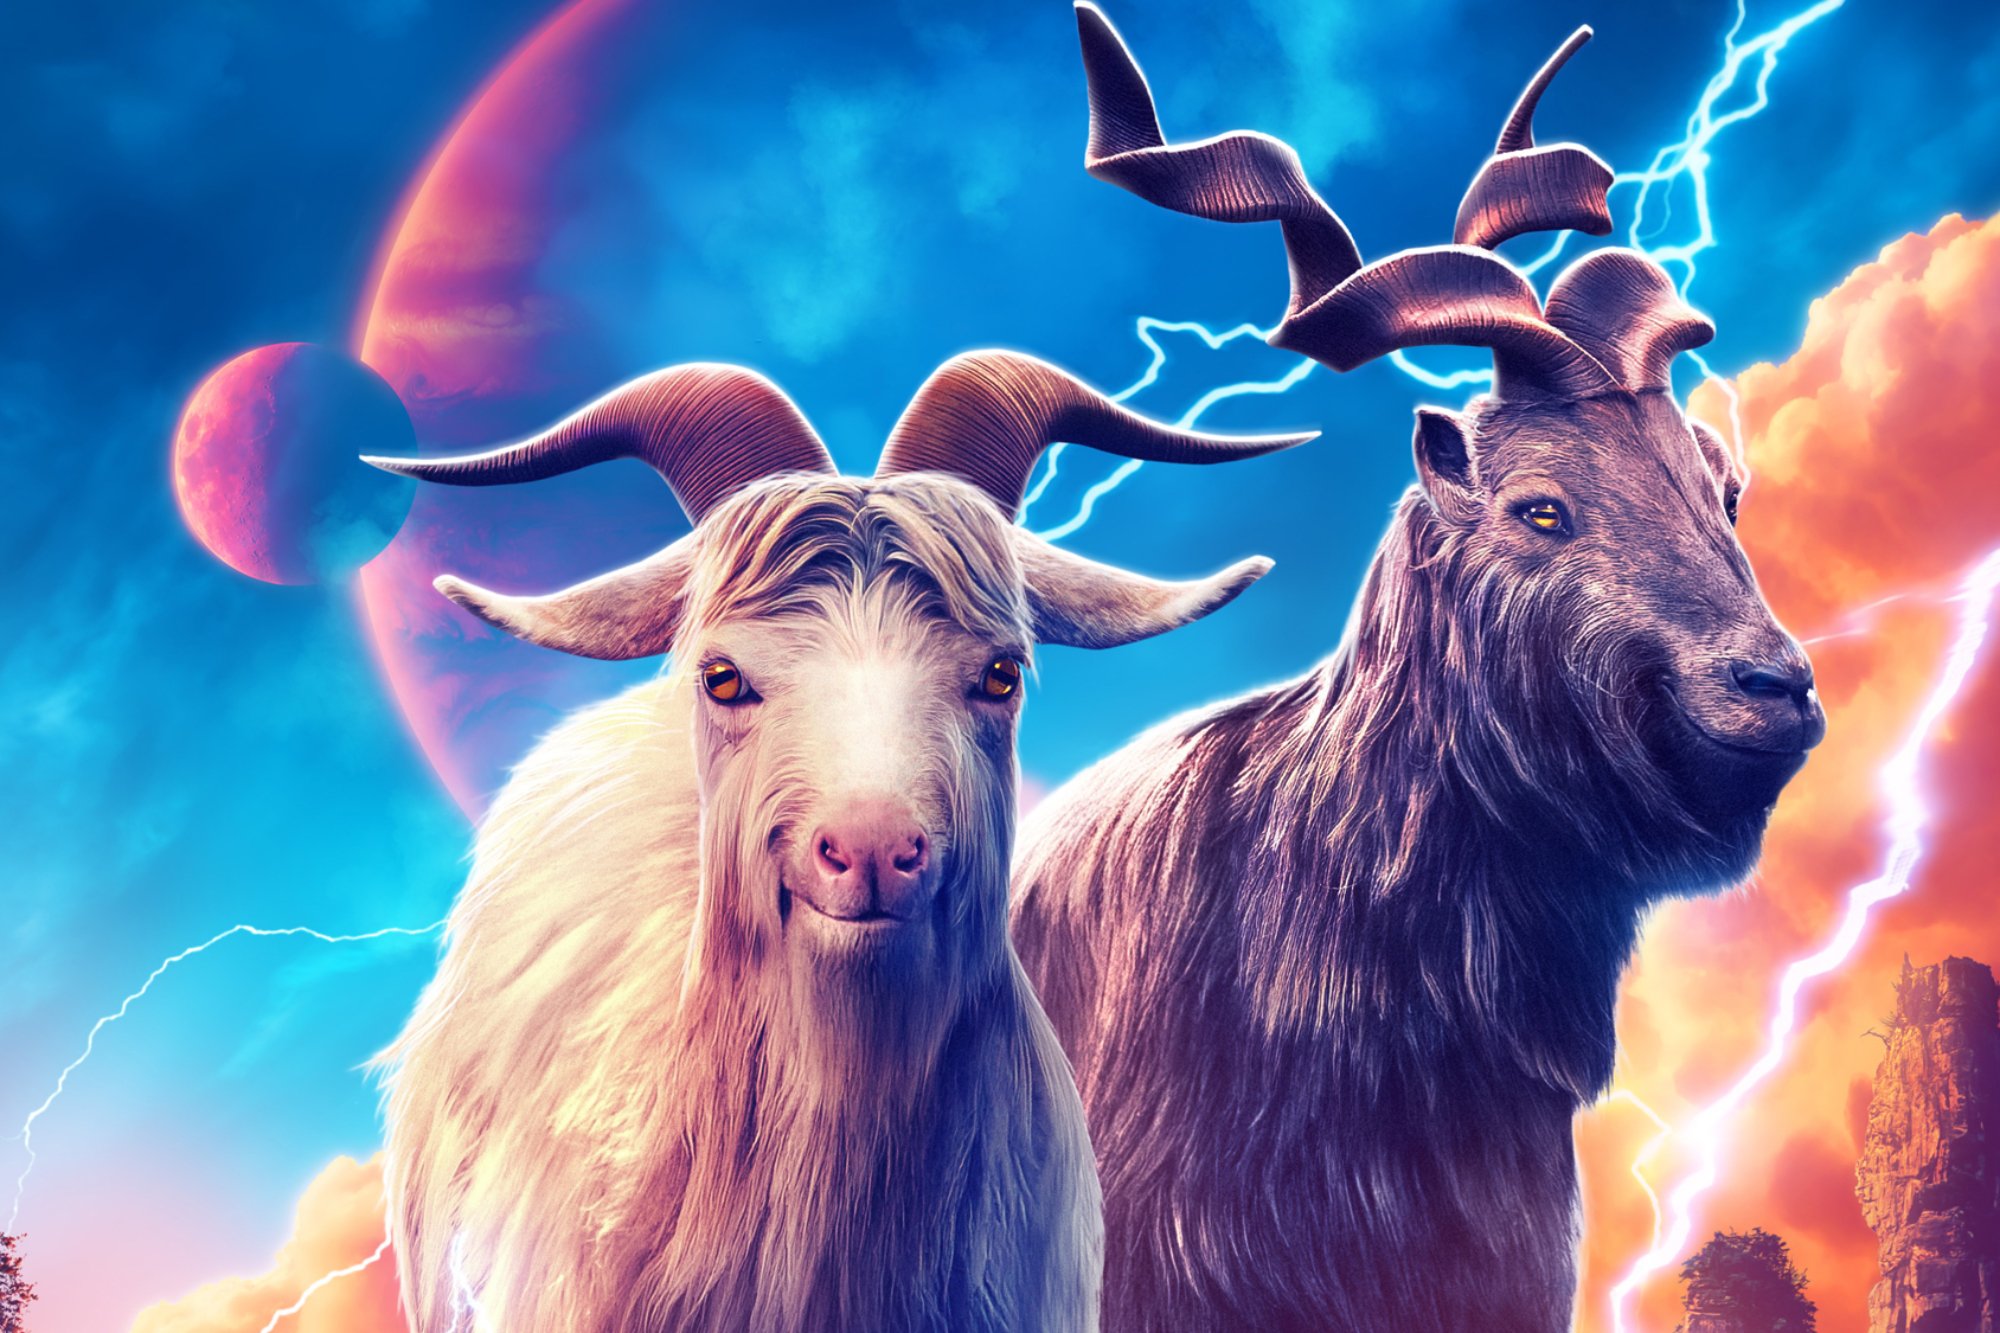 'Thor: Love and Thunder' goats from the poster